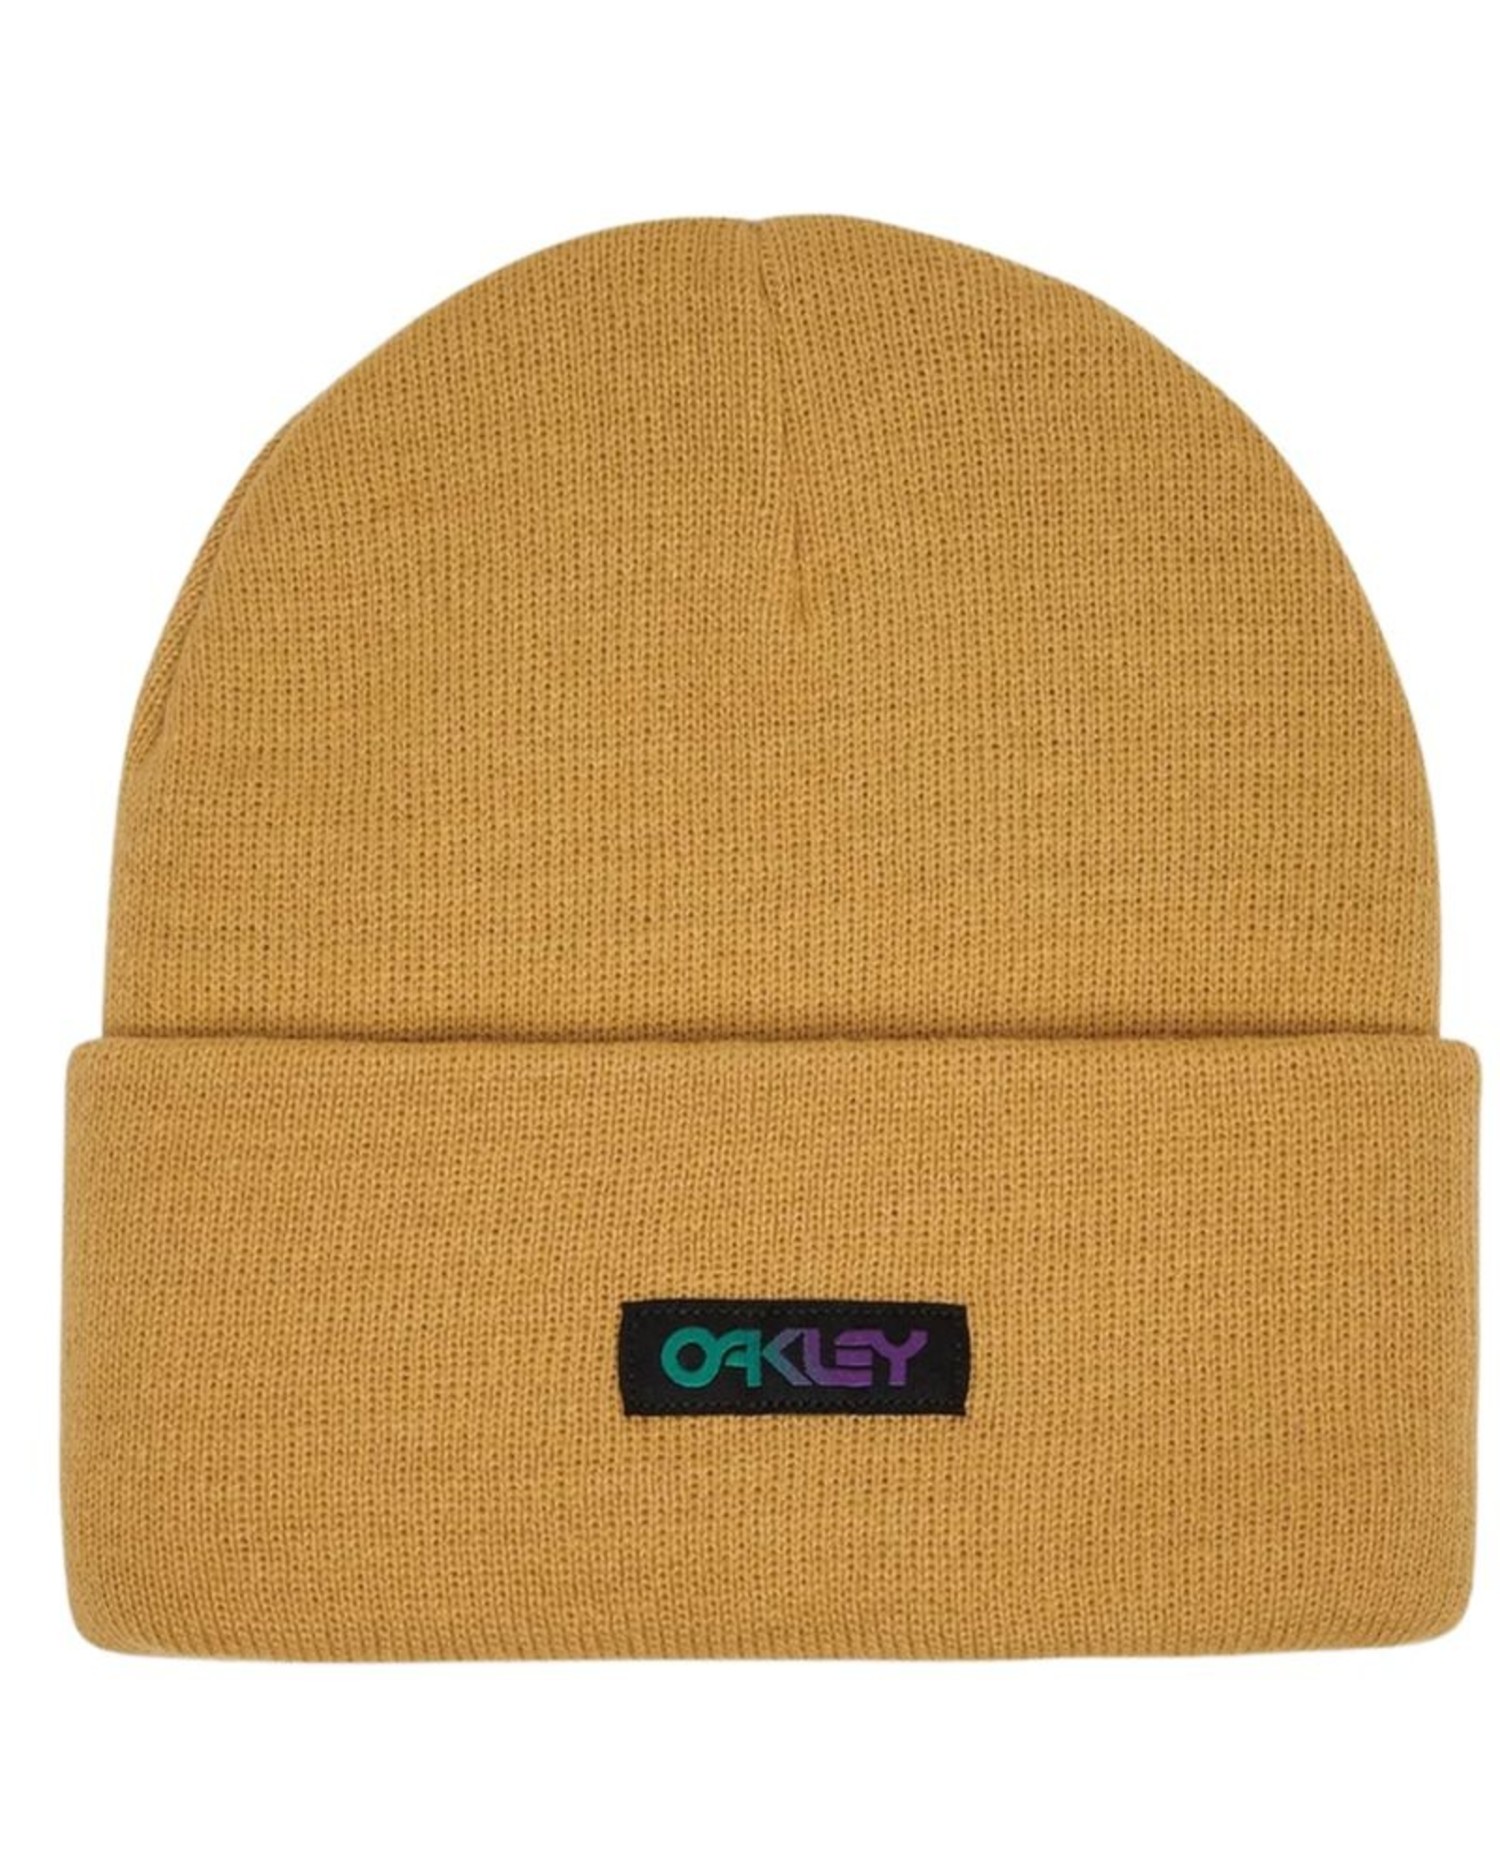 OAKLEY B1B Gradient Patch Beanie in Light Curry - Edge of the World |  Fernie BC